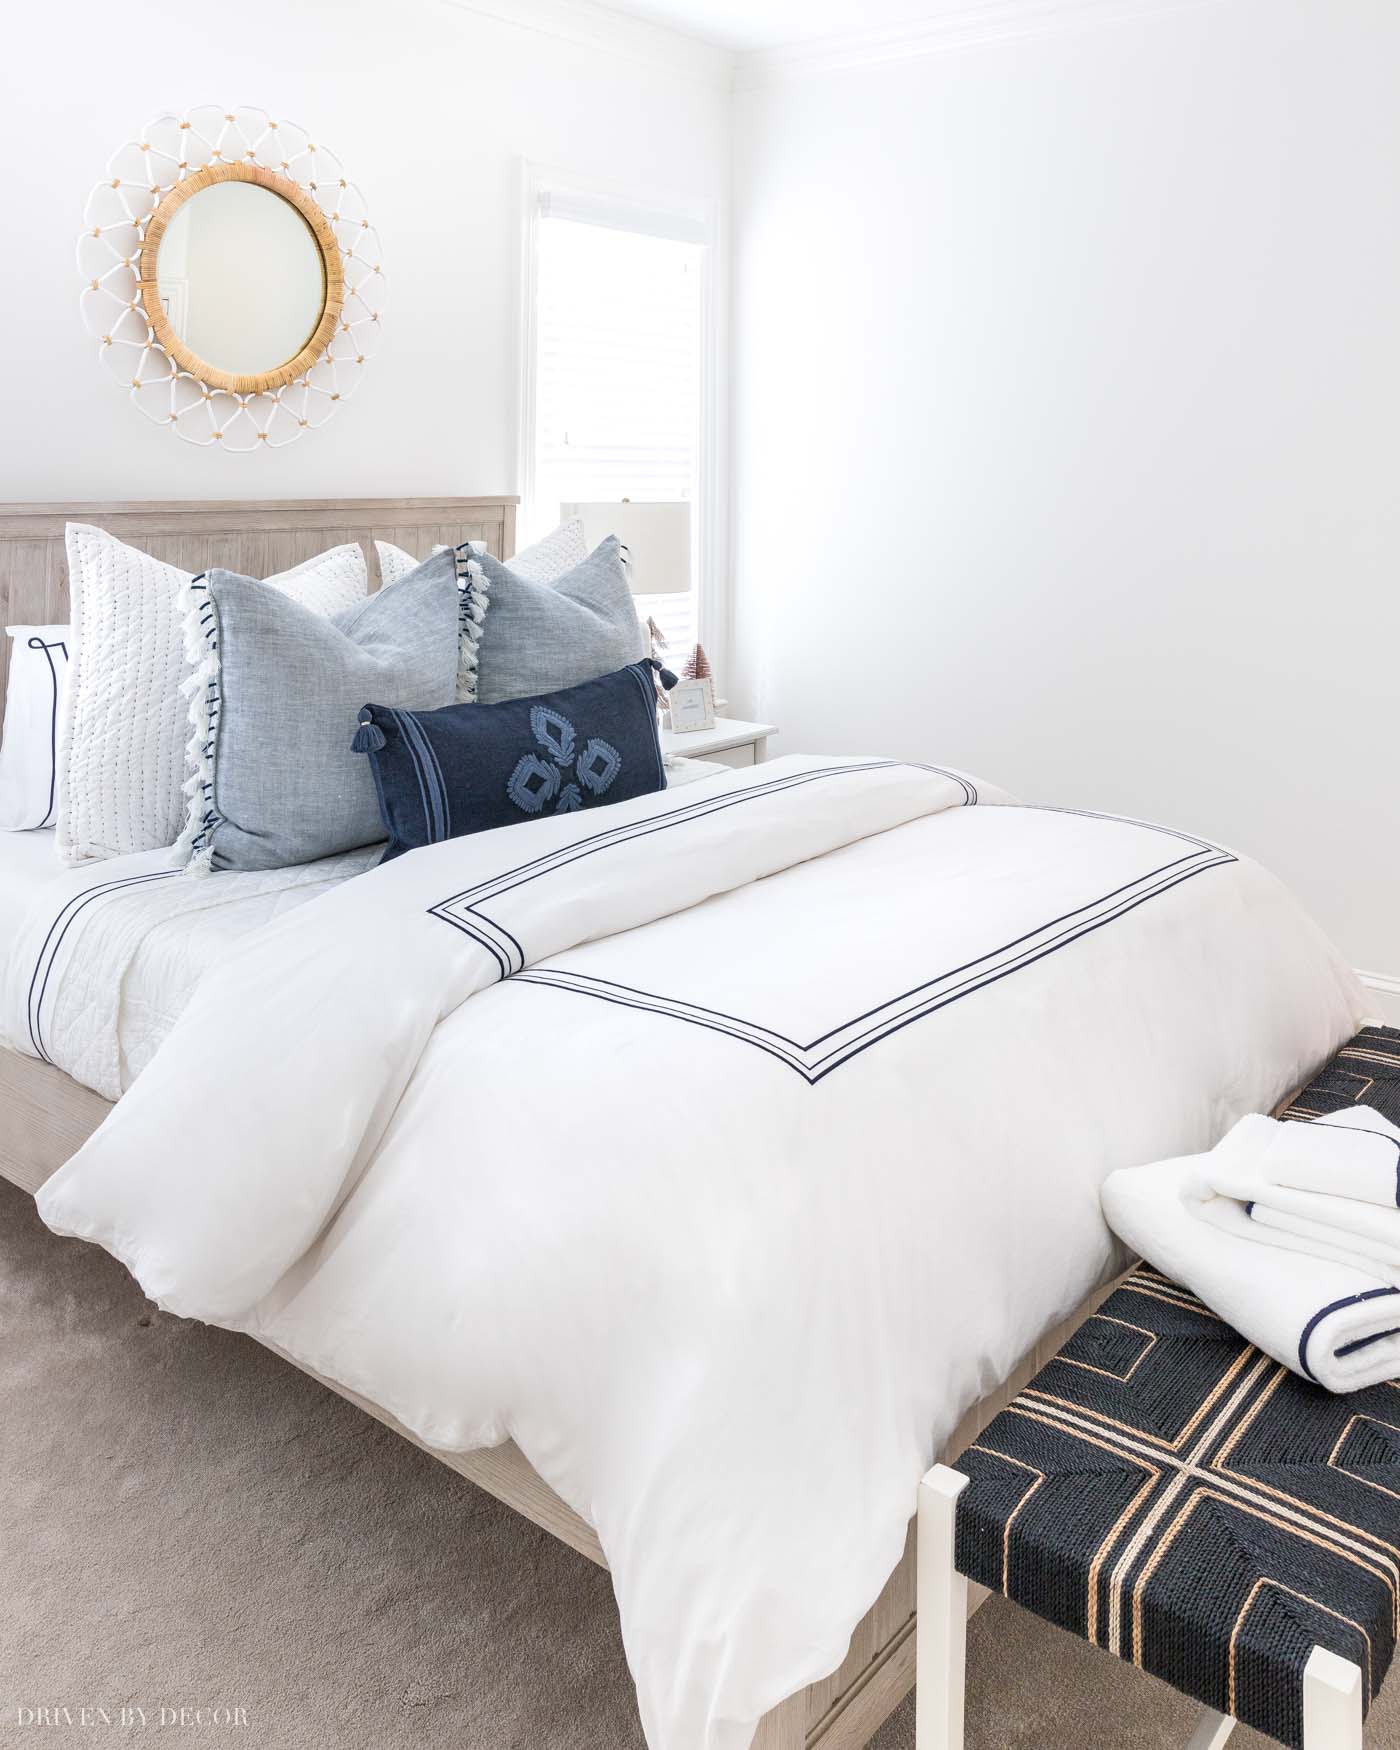 Great tips on how to layer your duvet and other bedding to make the perfect bed!